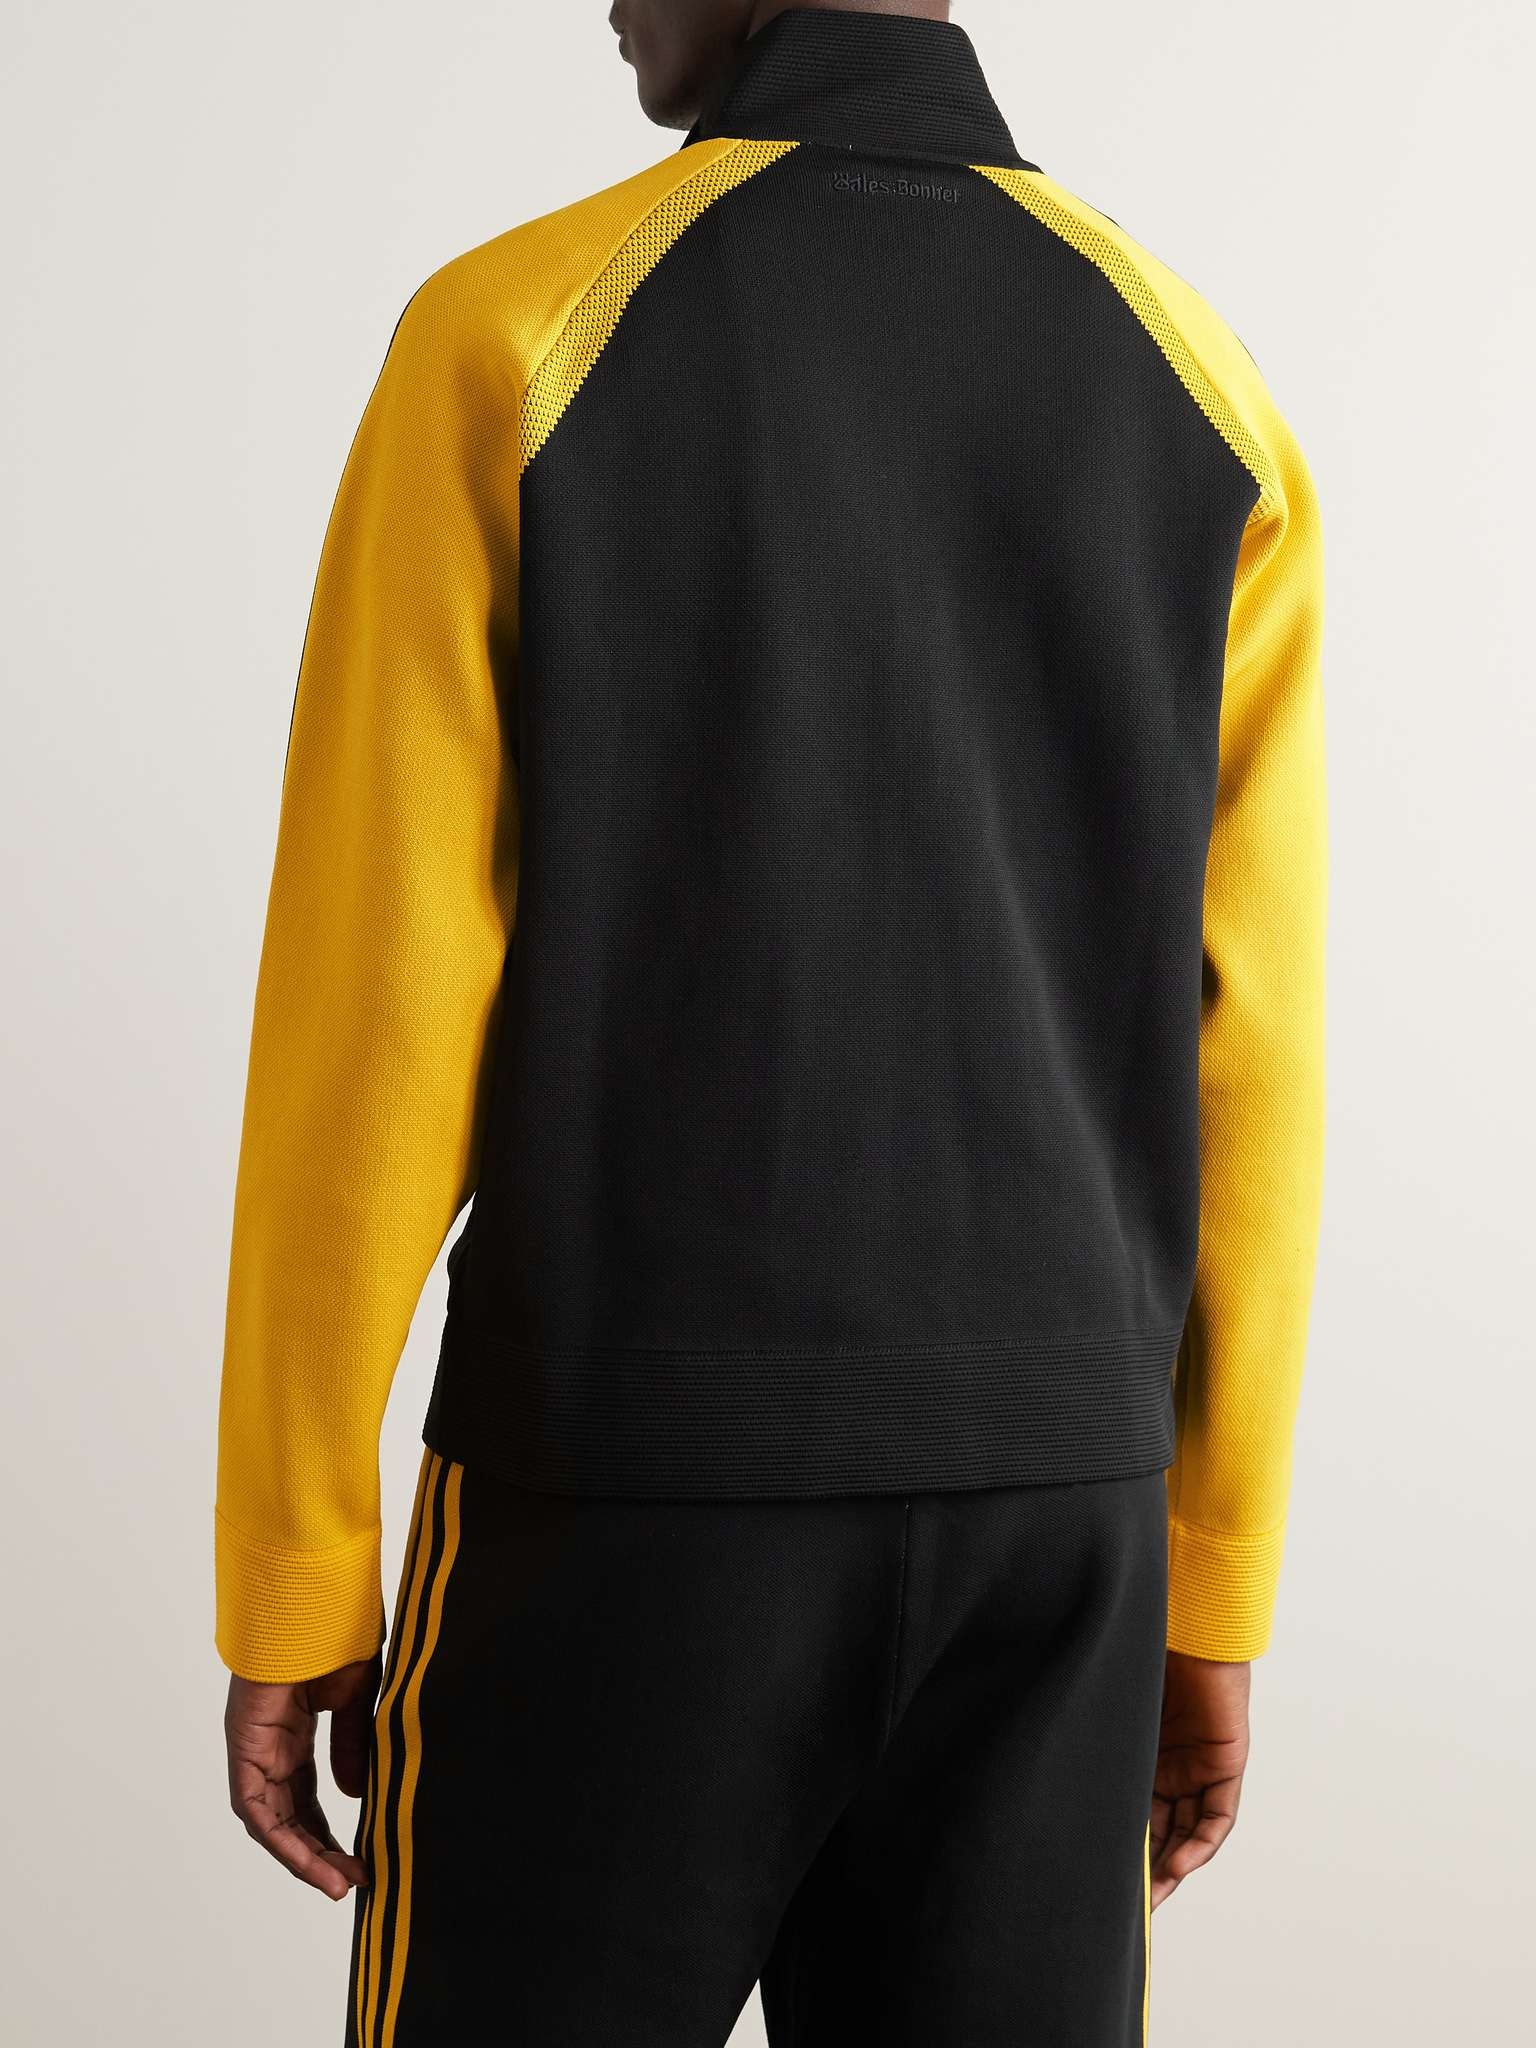 + Wales Bonner Two-Tone Knitted Zip-Up Track Jacket - 3